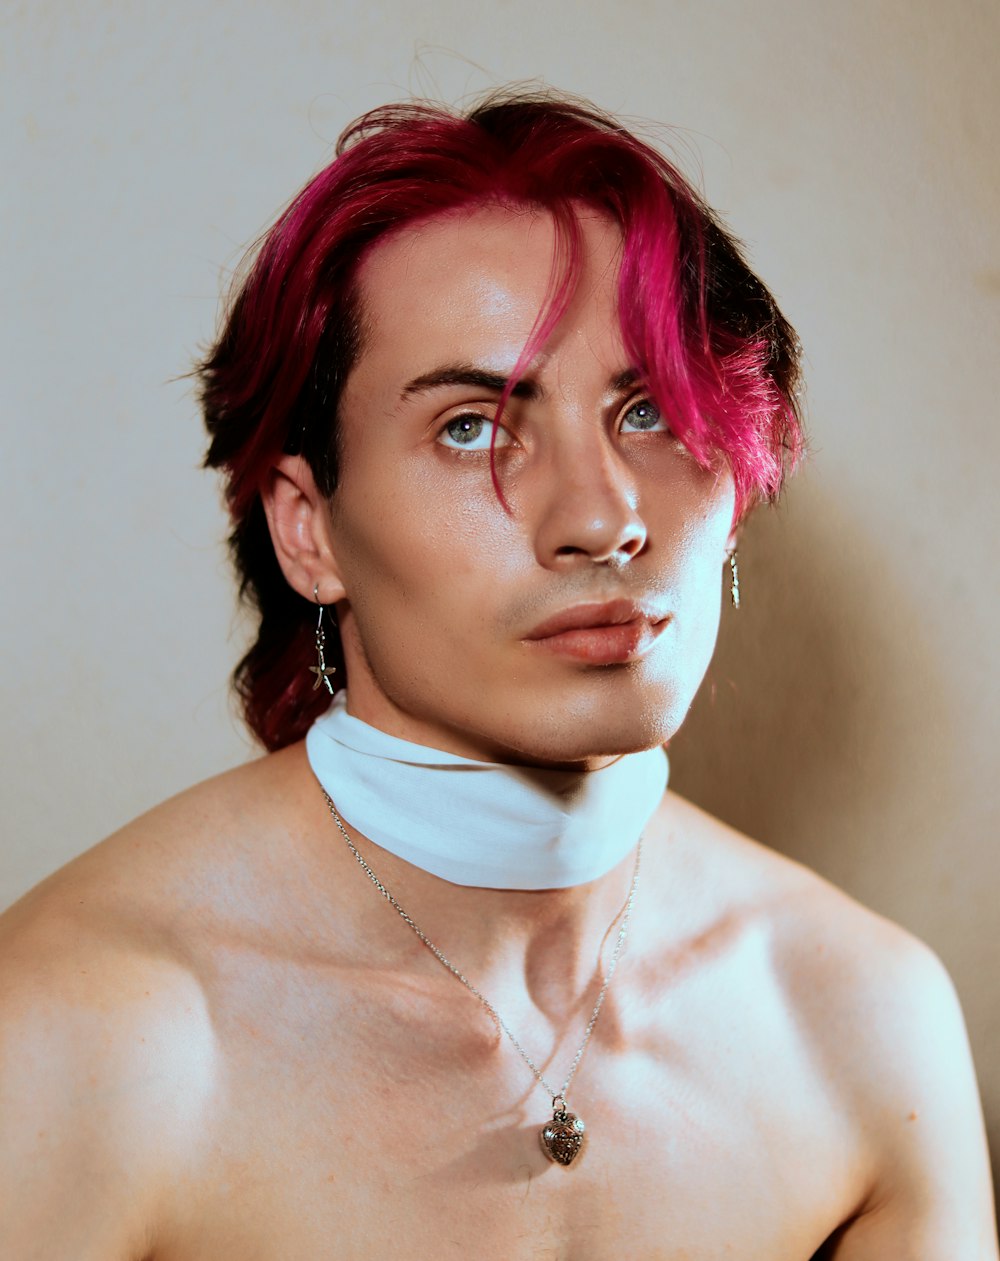 a man with red hair wearing a choker